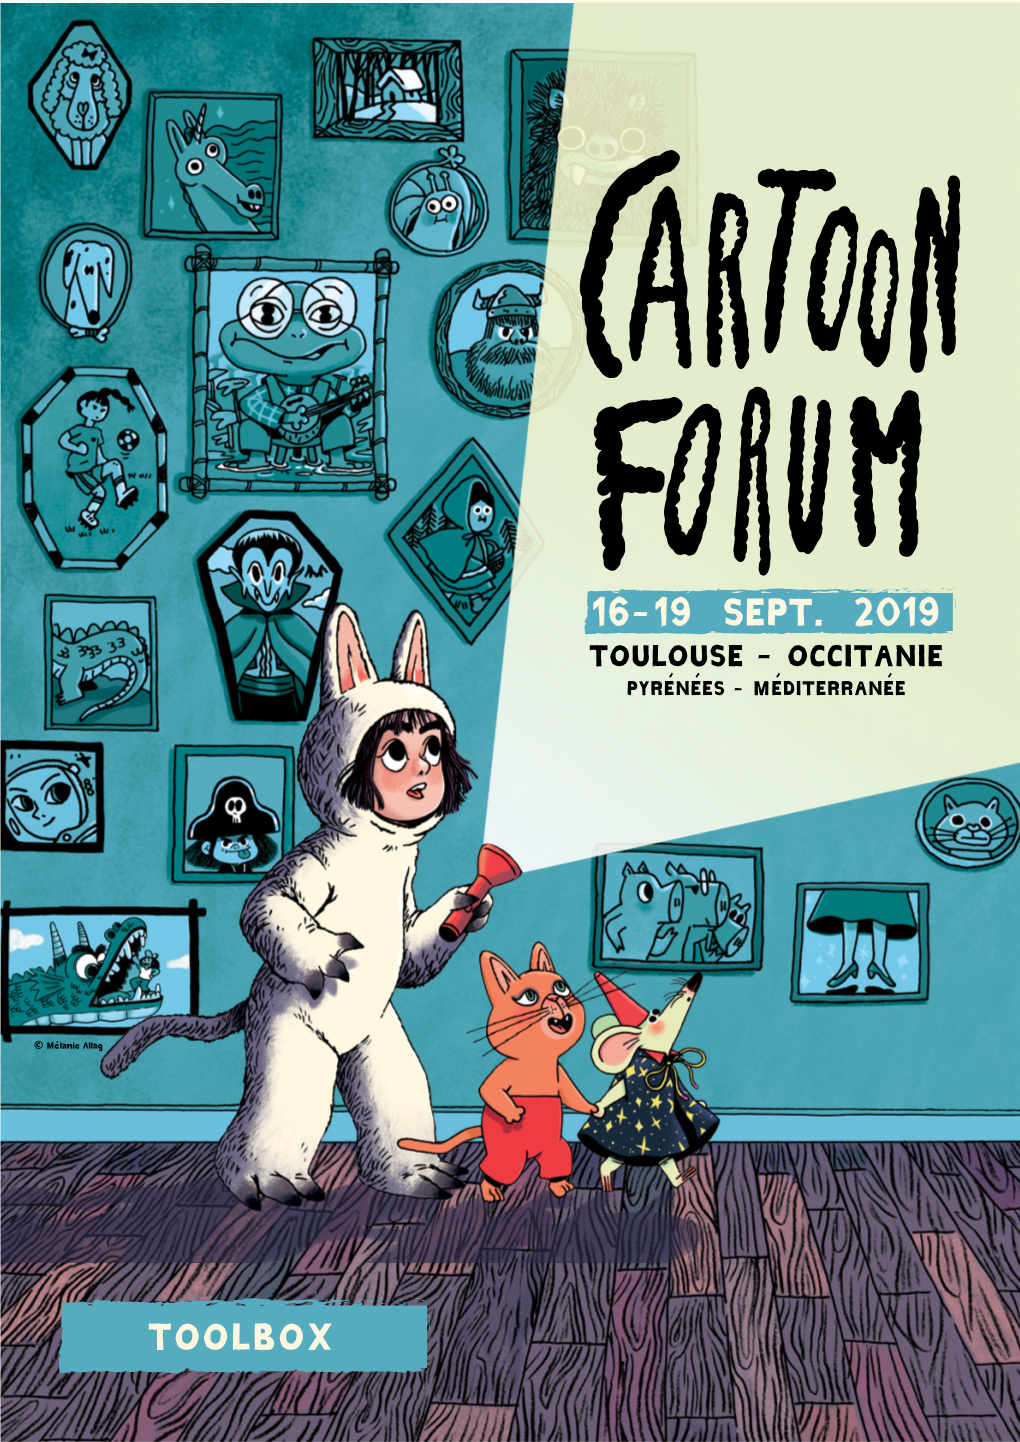 Cartoon Forum 2019 in Toulouse, Where Projects Come to Life